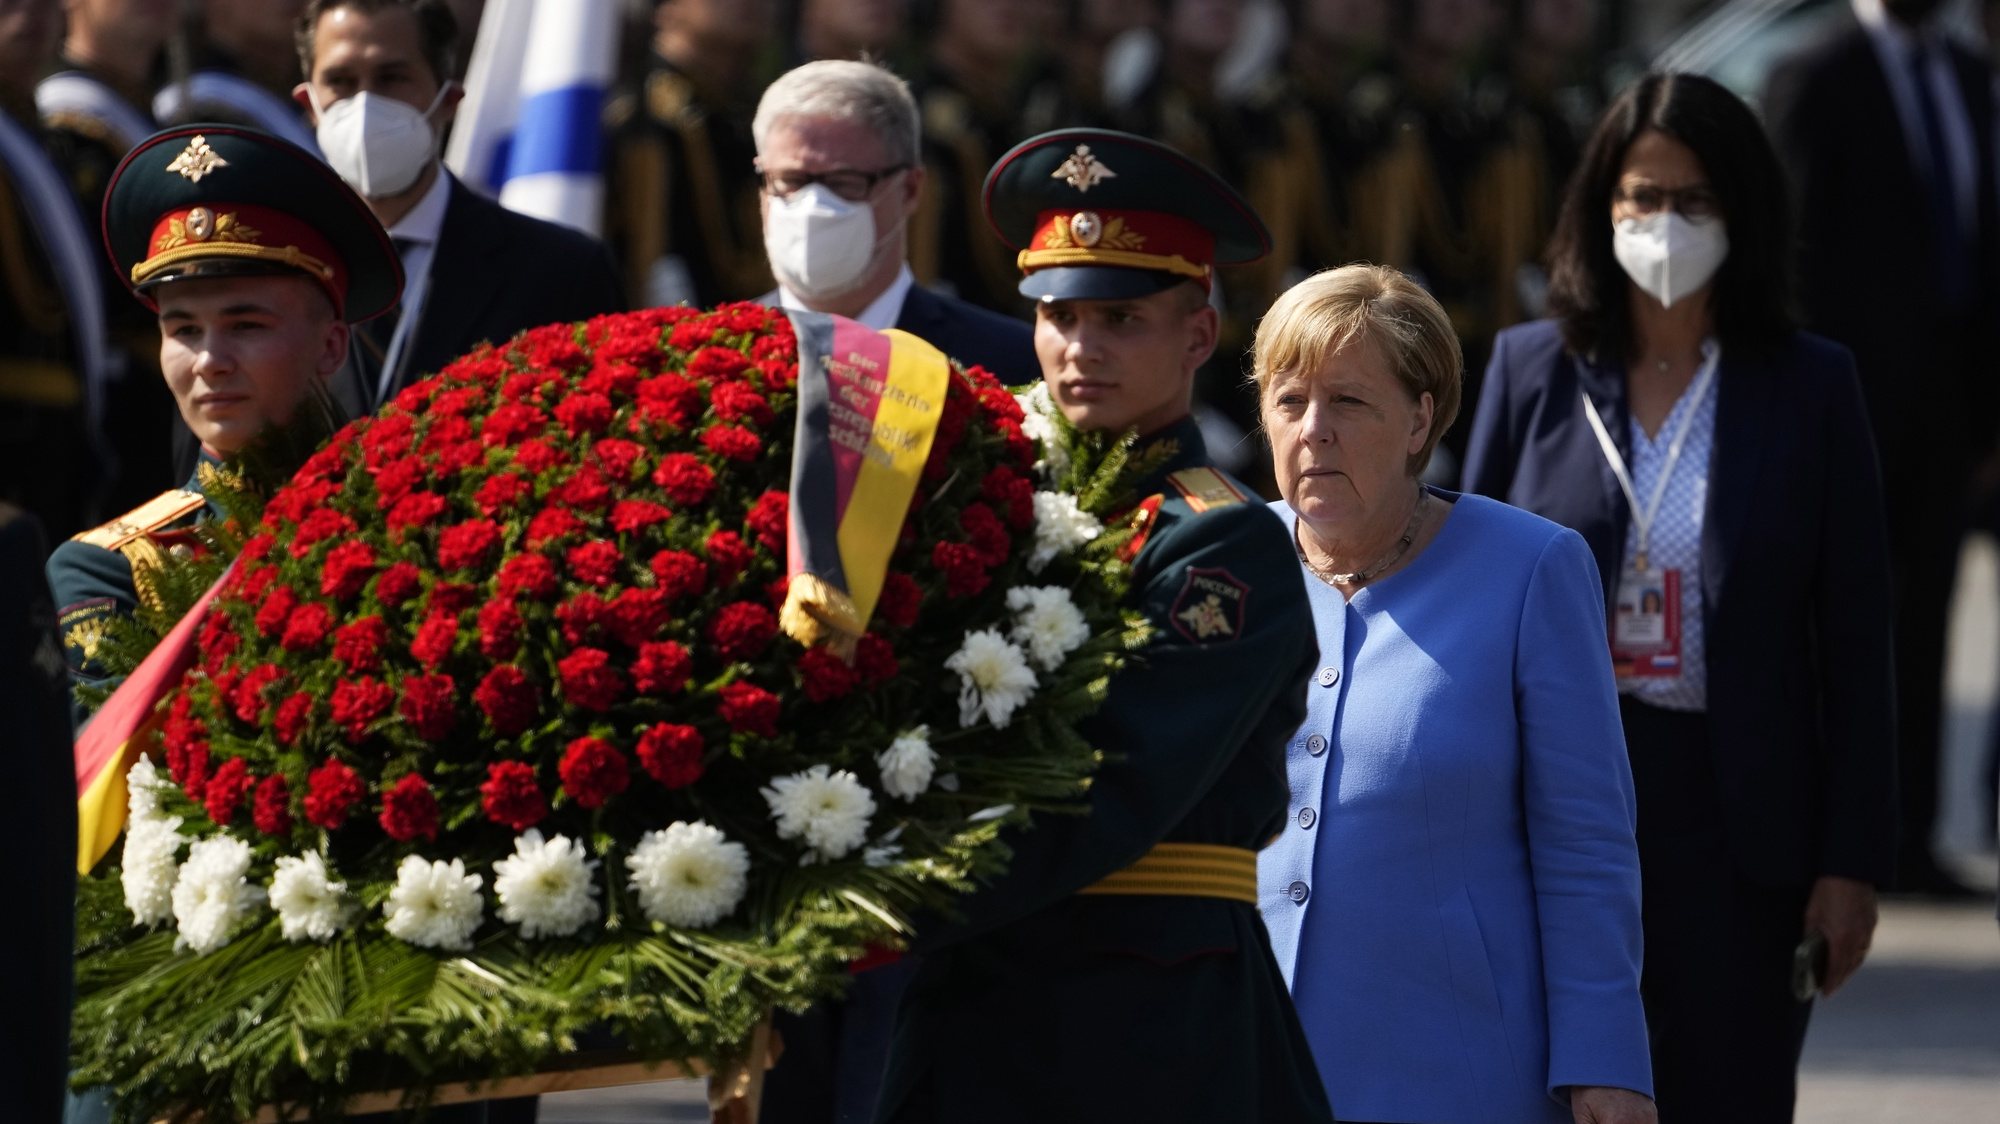 epa09421774 German Chancellor Angela Merkel attends a wreath laying ceremony at the Tomb of Unknown Soldier near the Kremlin wall in Moscow, Russia, 20 August 2021, prior to talks with Russian President Vladimir Putin. The talks between Merkel and Putin are expected to focus on Afghanistan, the Ukrainian crisis and the situation in Belarus among other issues.  EPA/ALEXANDER ZEMLIANICHENKO/POOL